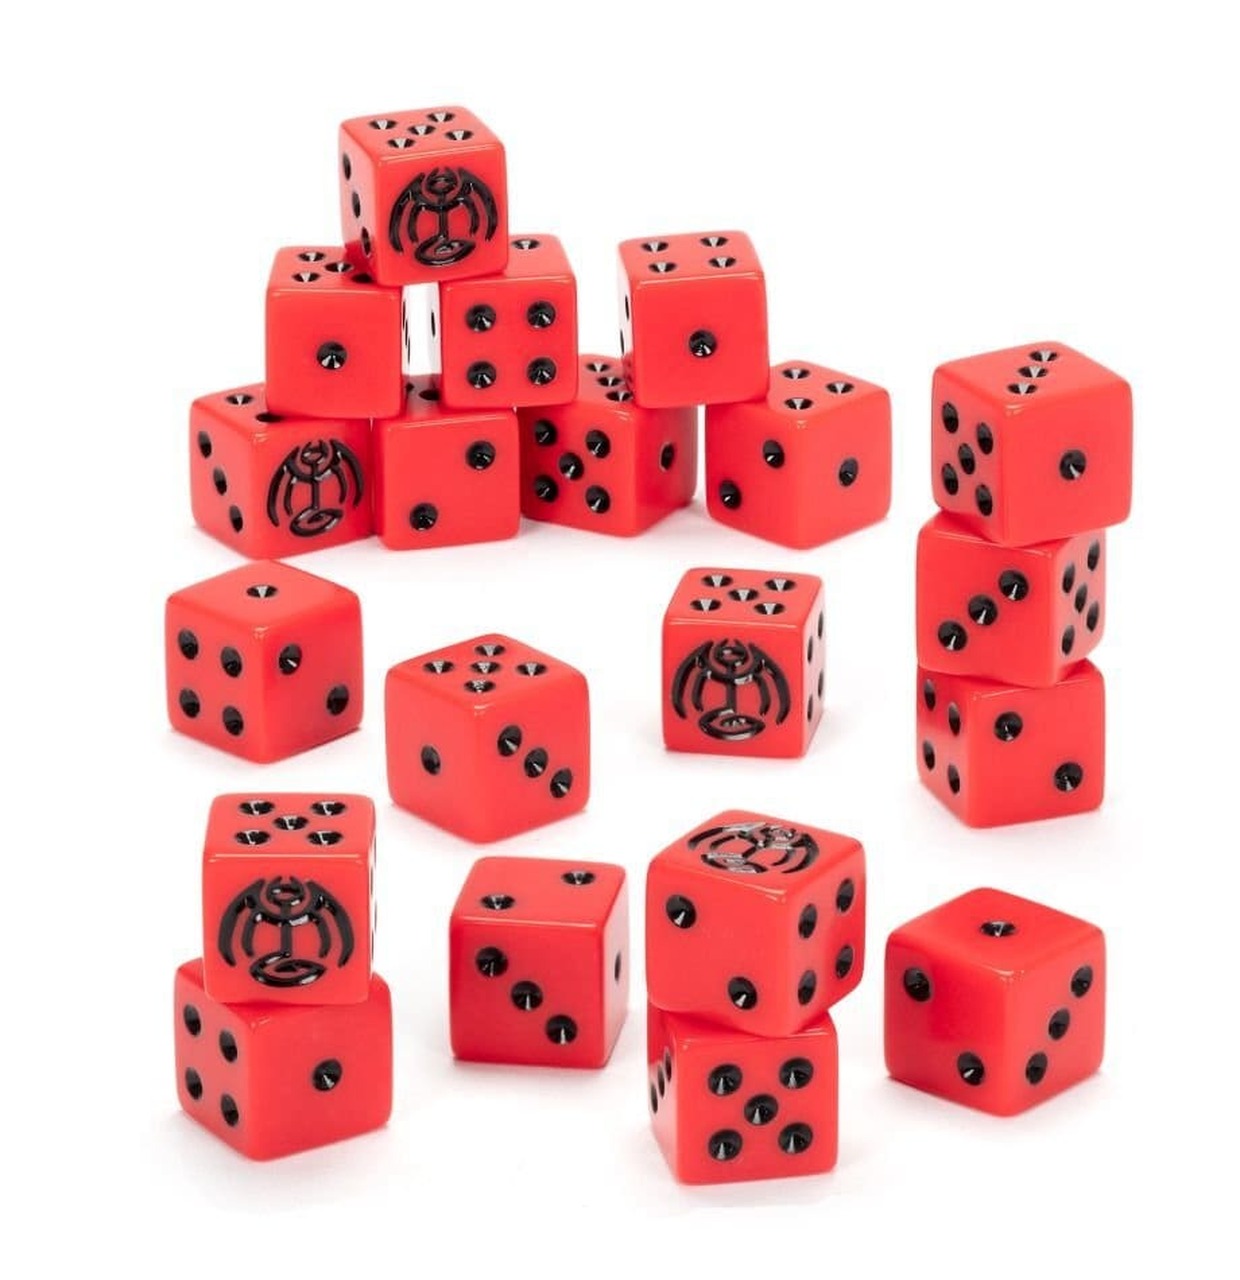 AOS - Daughters of Khaine: Dice Set